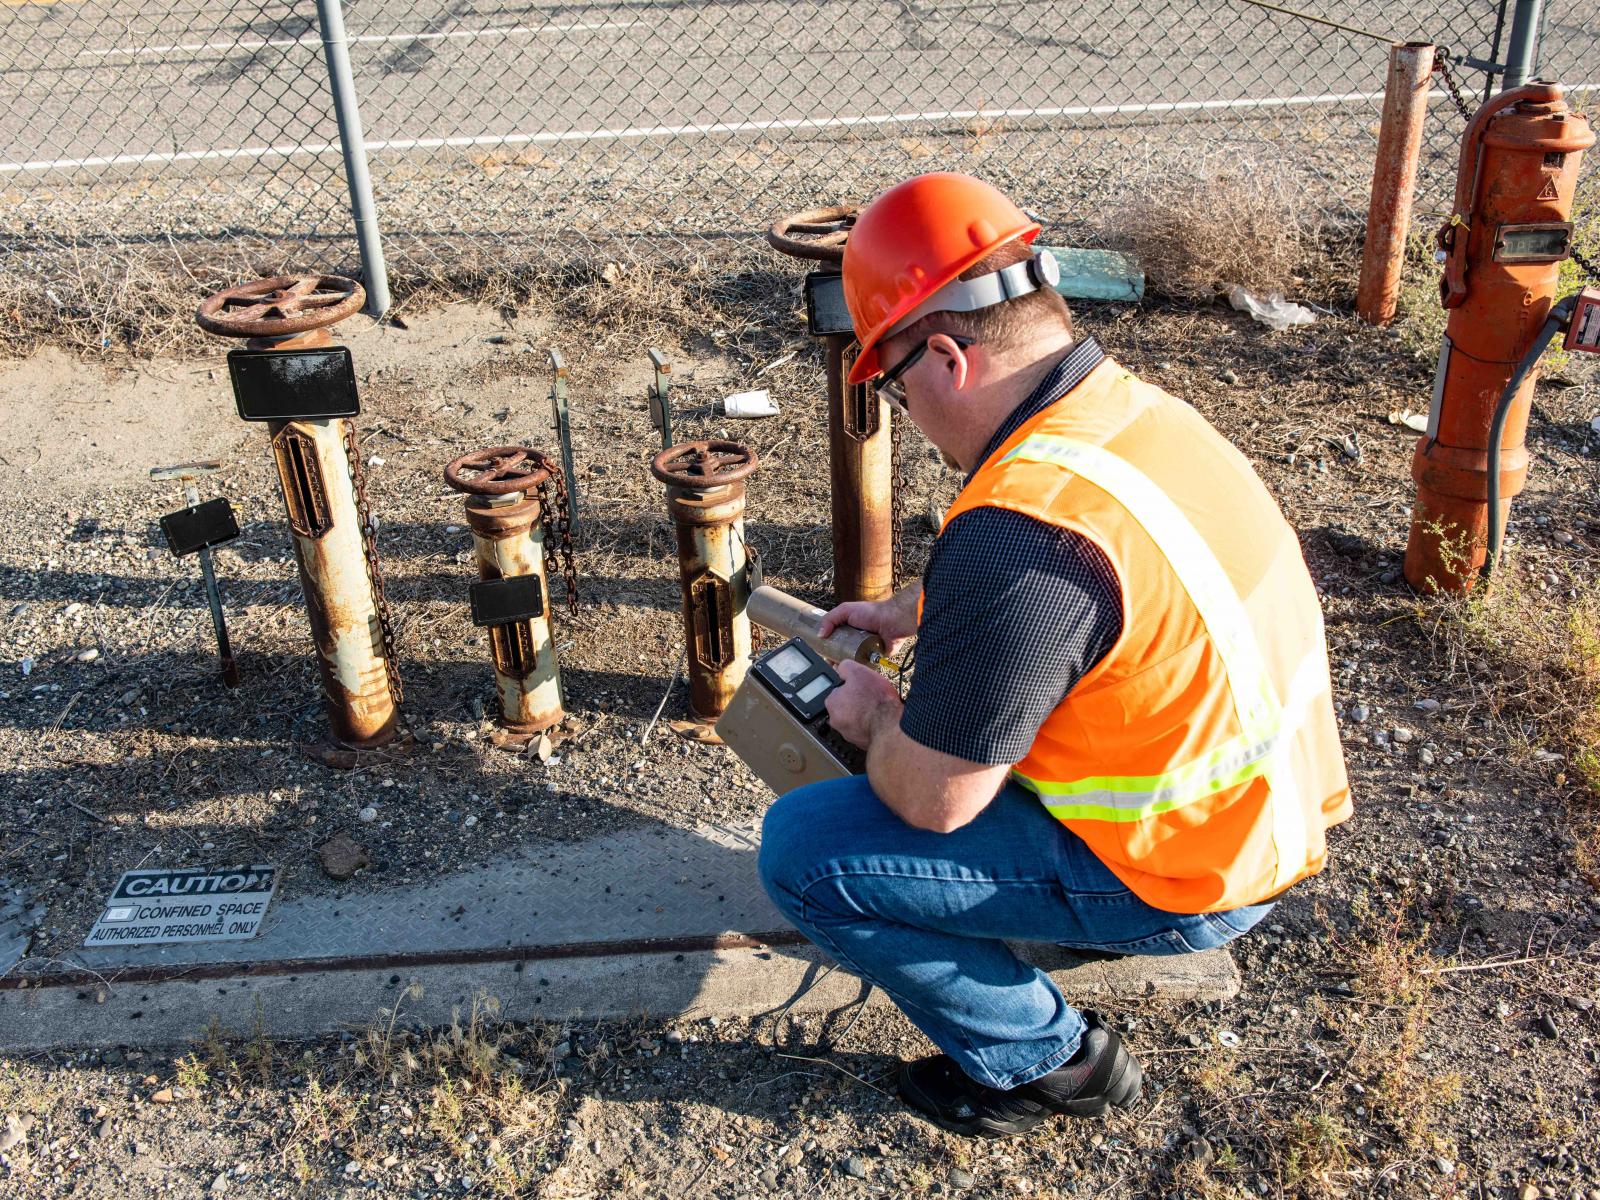 Man wearing safety vest and hard hat holds a geiger counter by some rusty pipes to see if they are radioactive